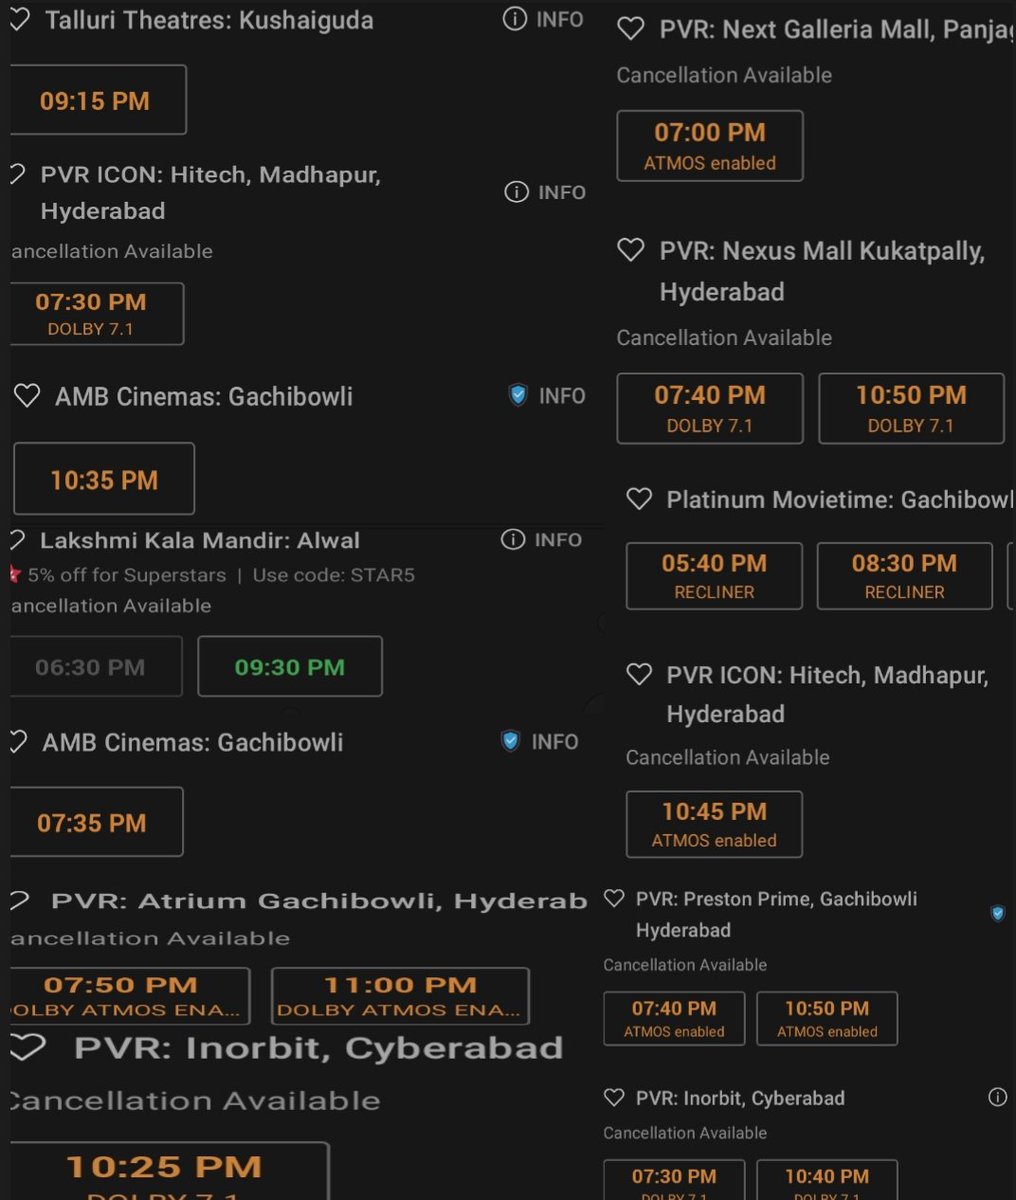 17ff with 1 sold out in Hyderabad🔥
@KicchaSudeep 👑

#PanIndiaBBVikrantRona
#VikrantRona #KicchaSudeep
#VRonJuly28 #VRin3D